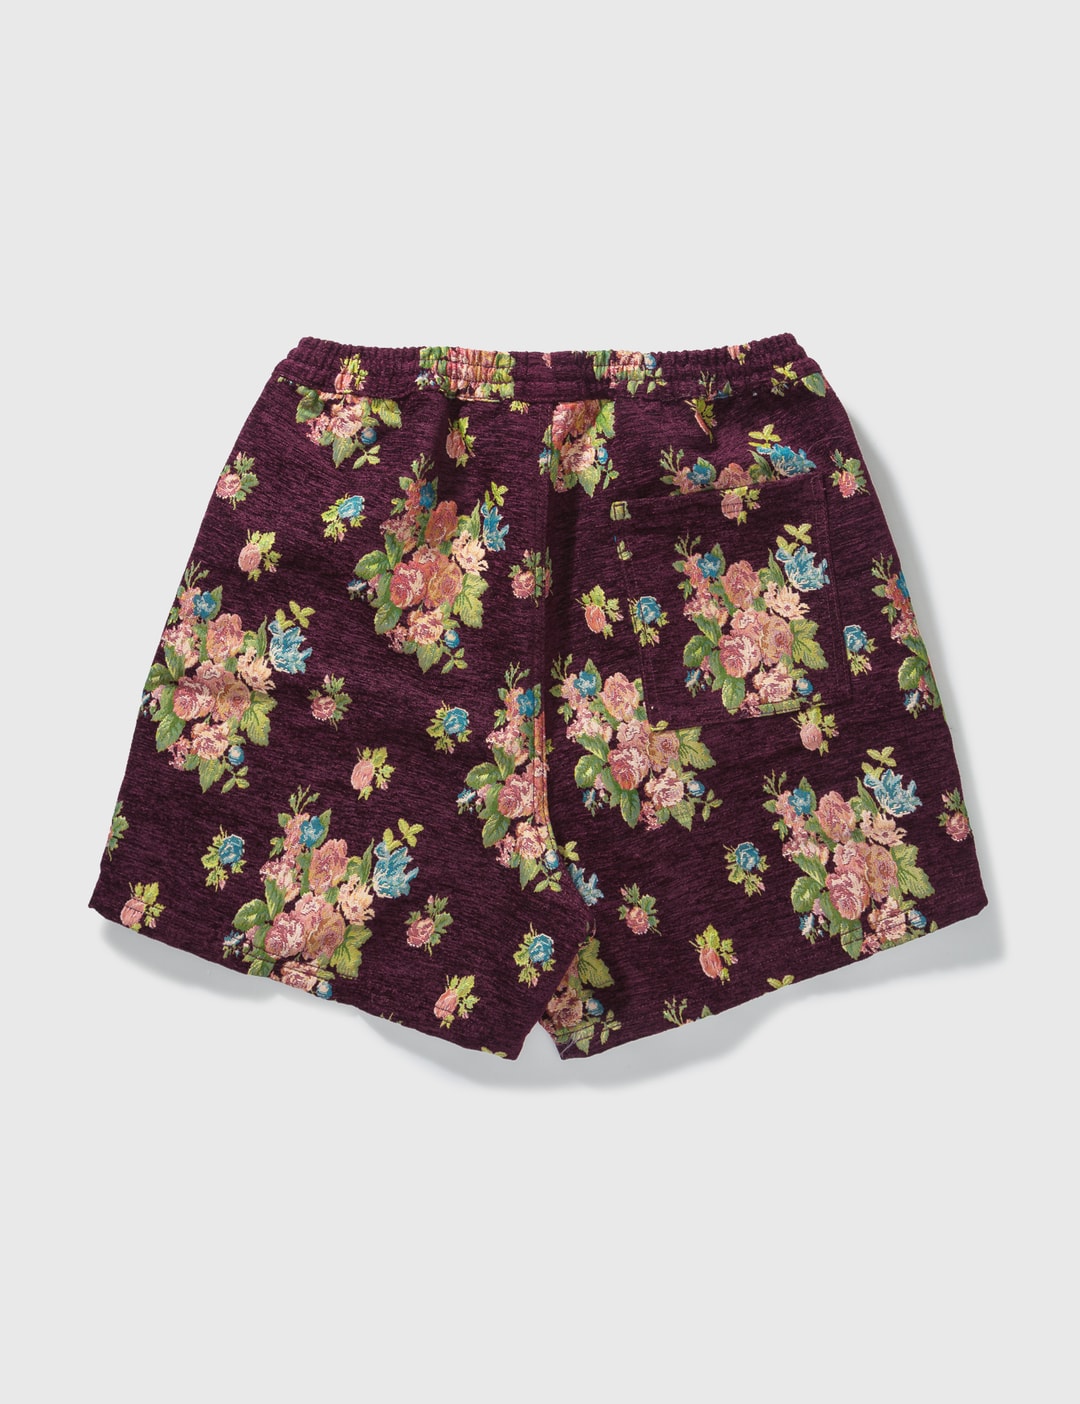 Pleasures - Dejavu Woven Floral Shorts | HBX - Globally Curated Fashion ...